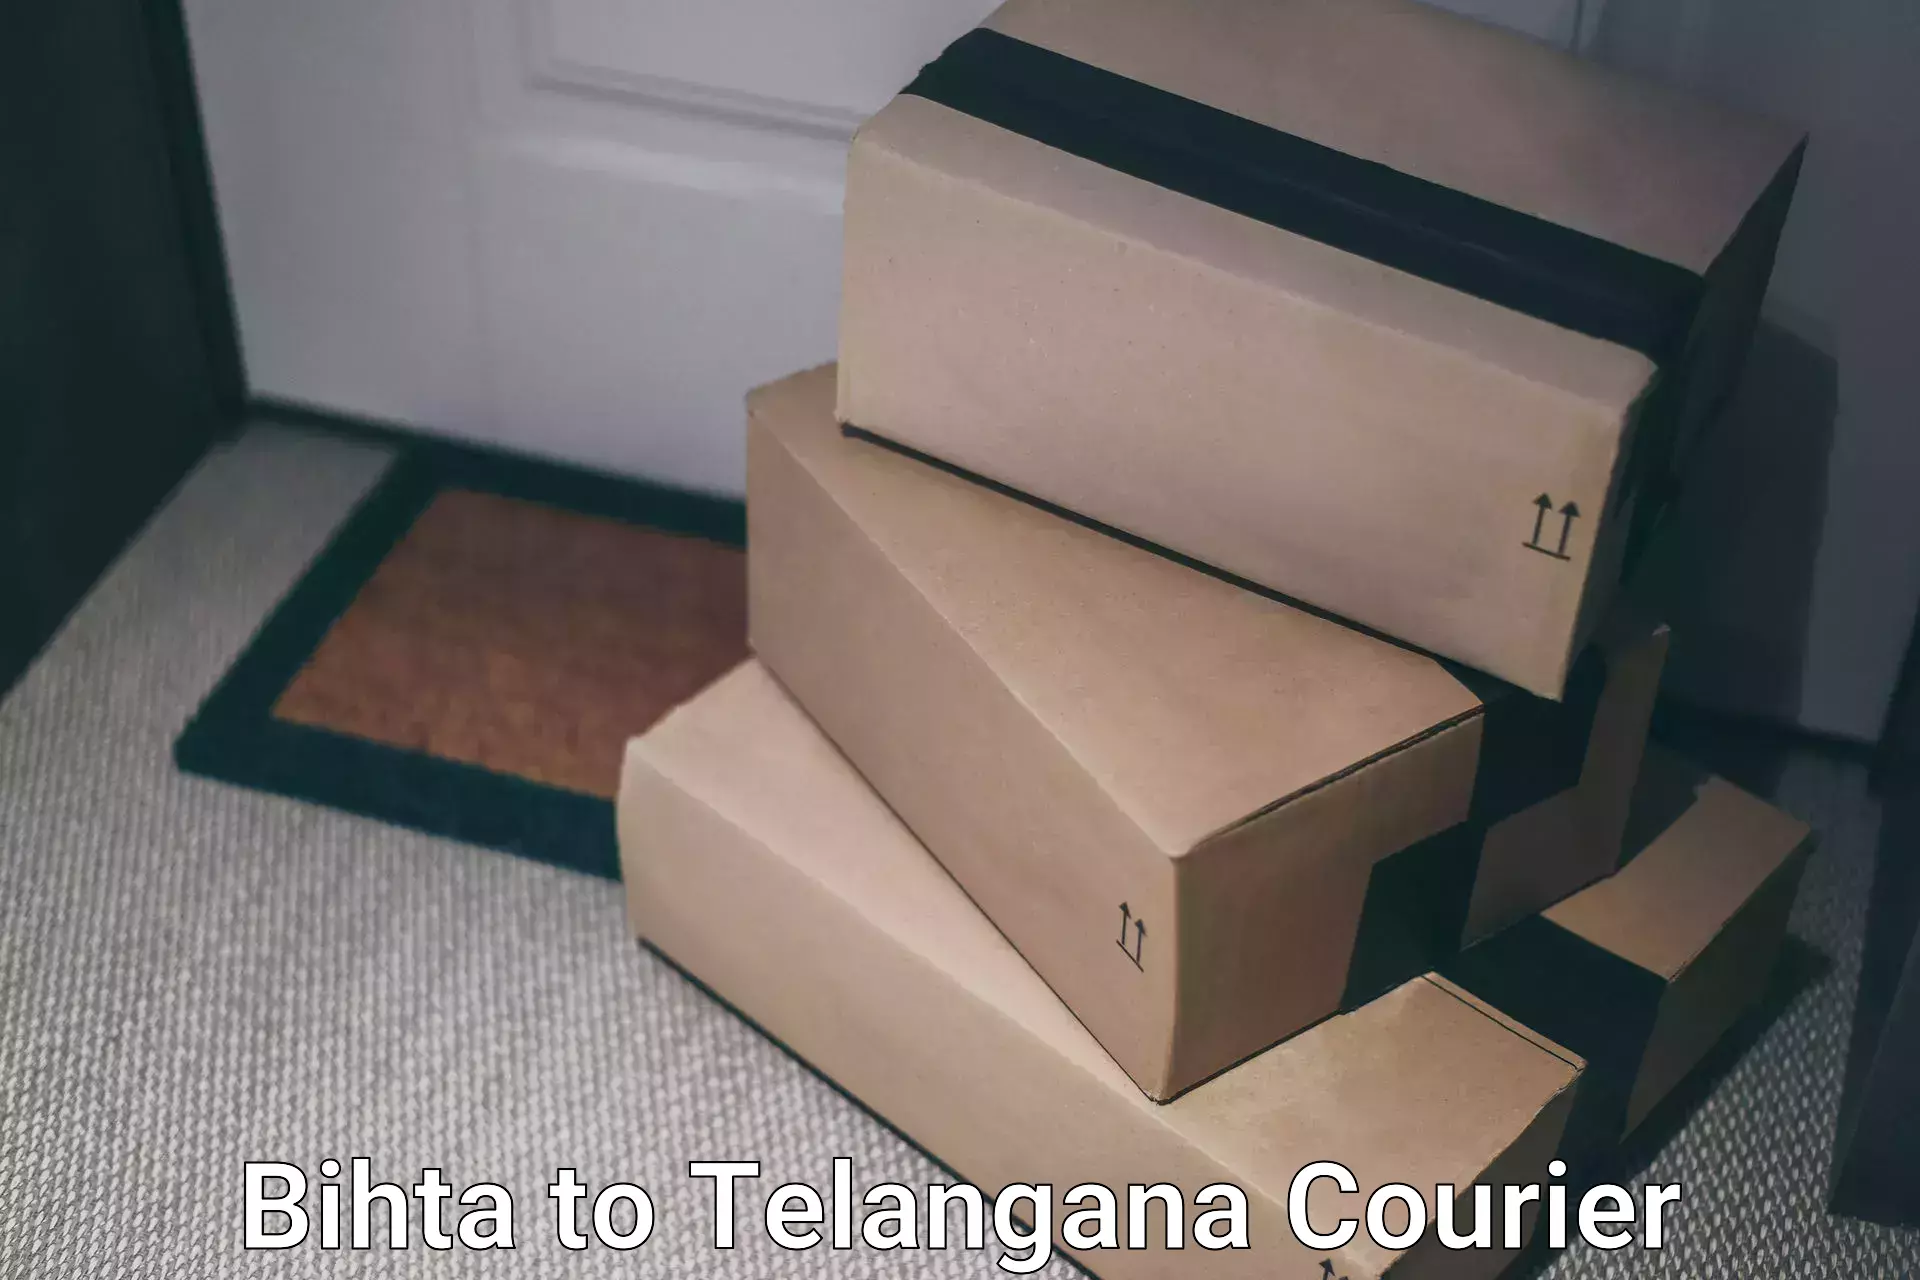 Same-day delivery options Bihta to Mancherial